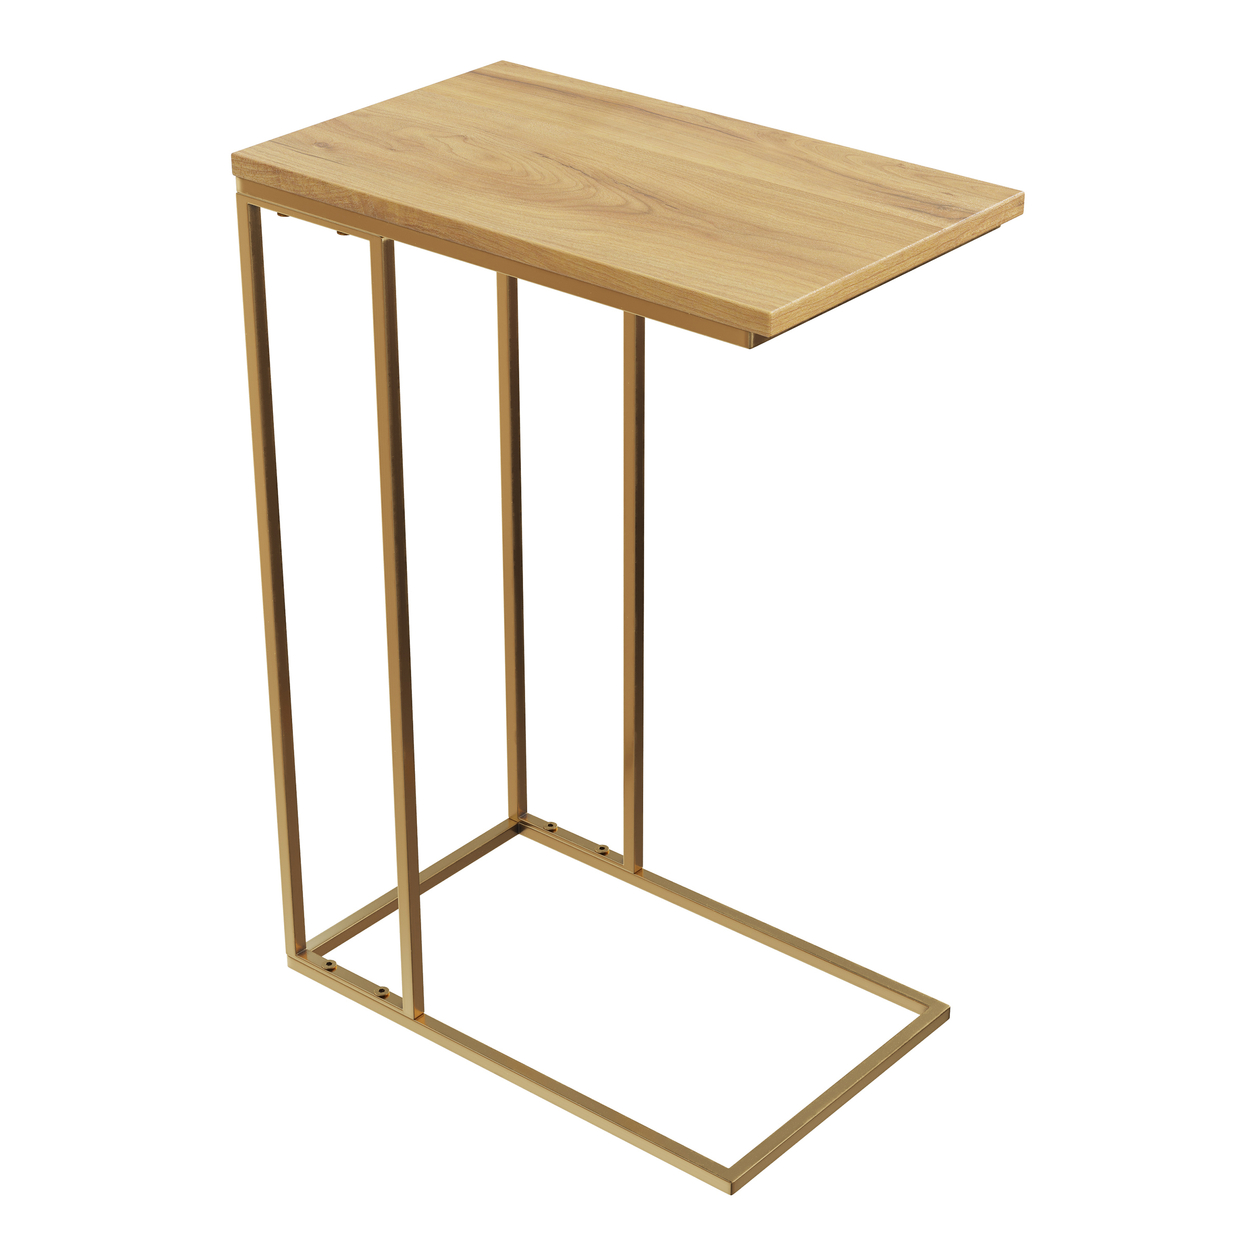 C-Shaped End Table, Faux Marble Side Table Gold Iron Frame Modern Living Room